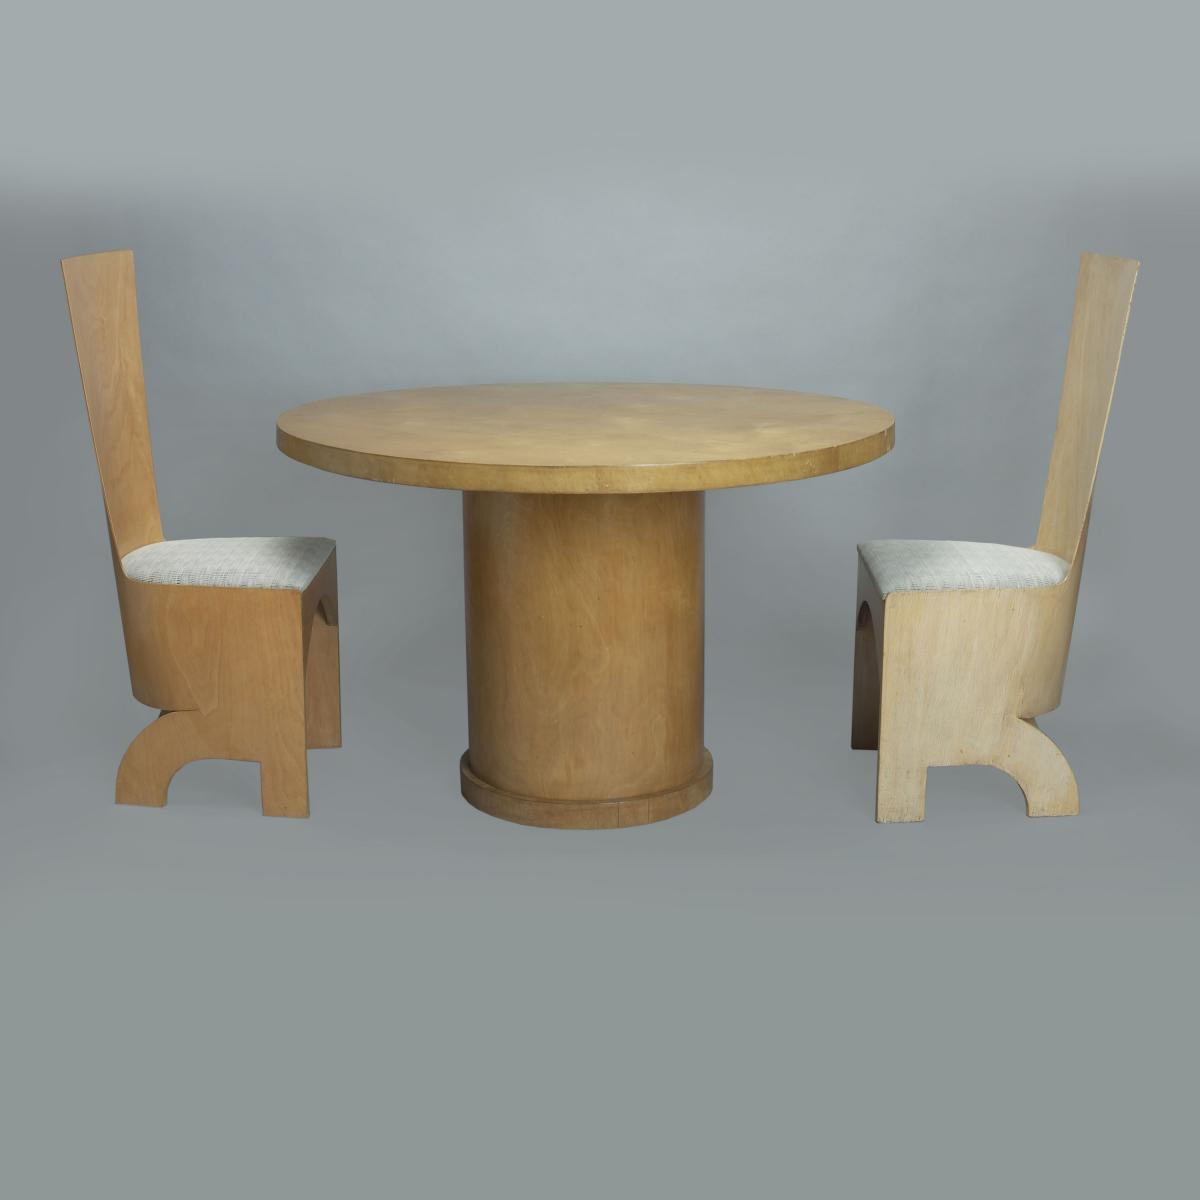 Gerald Summers Dining Table -  Made by Makers of Simple Furniture (1931-1940)